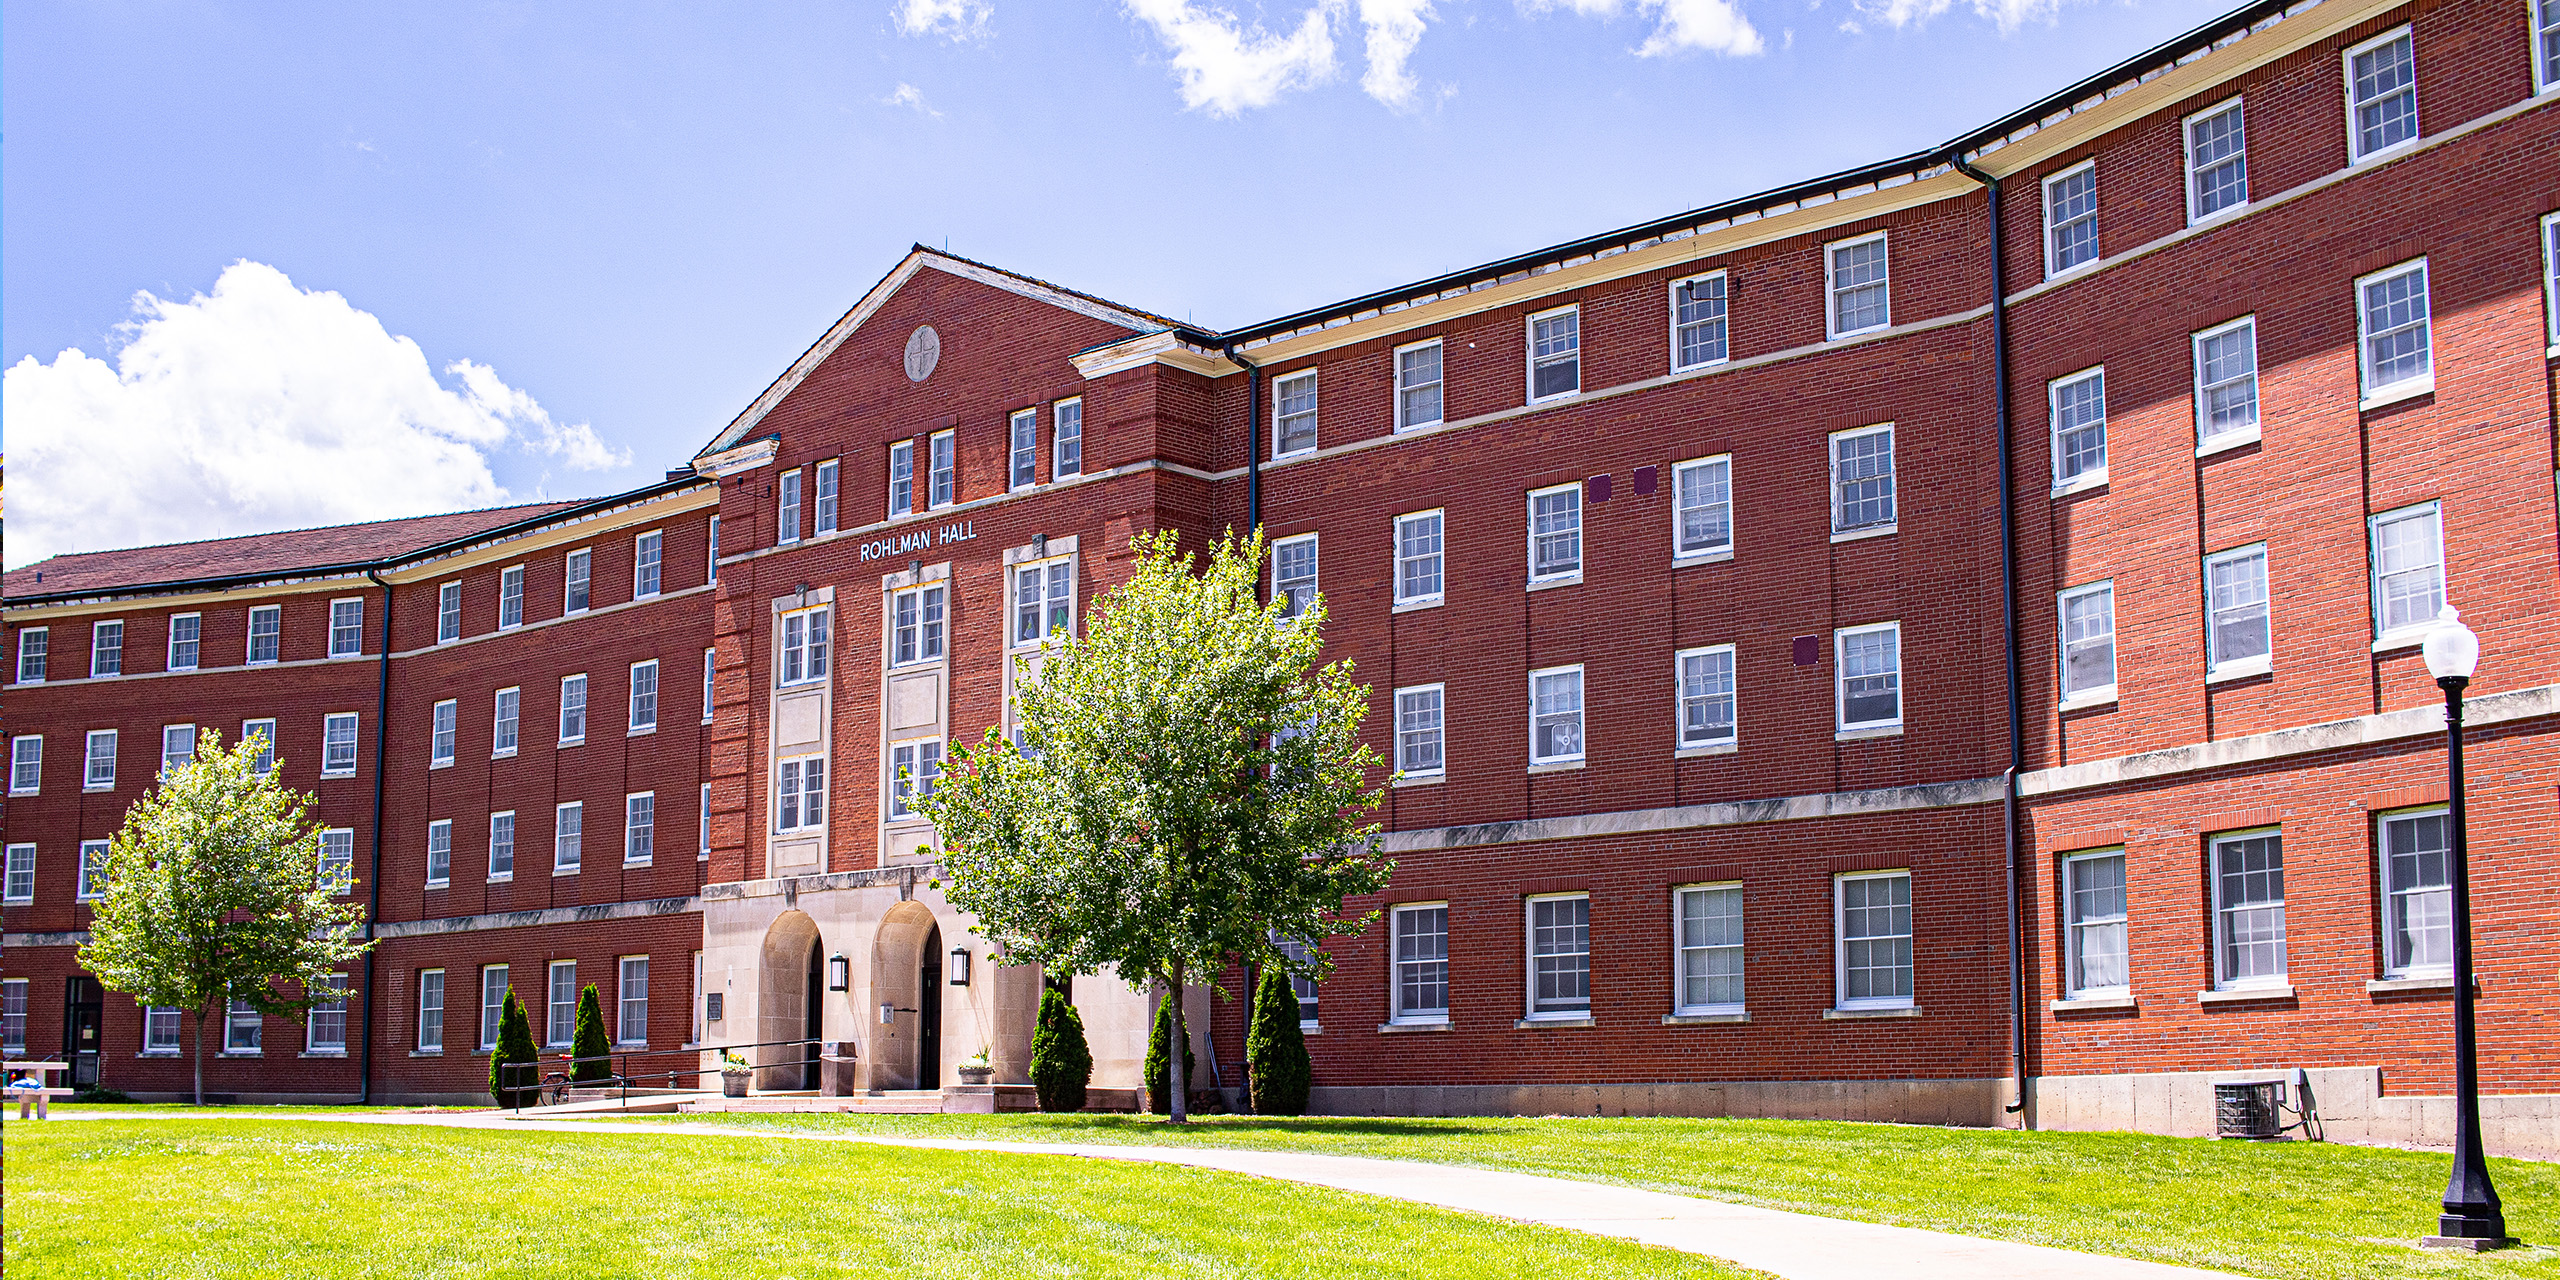 front outside view of Loras College Rohlman Hall